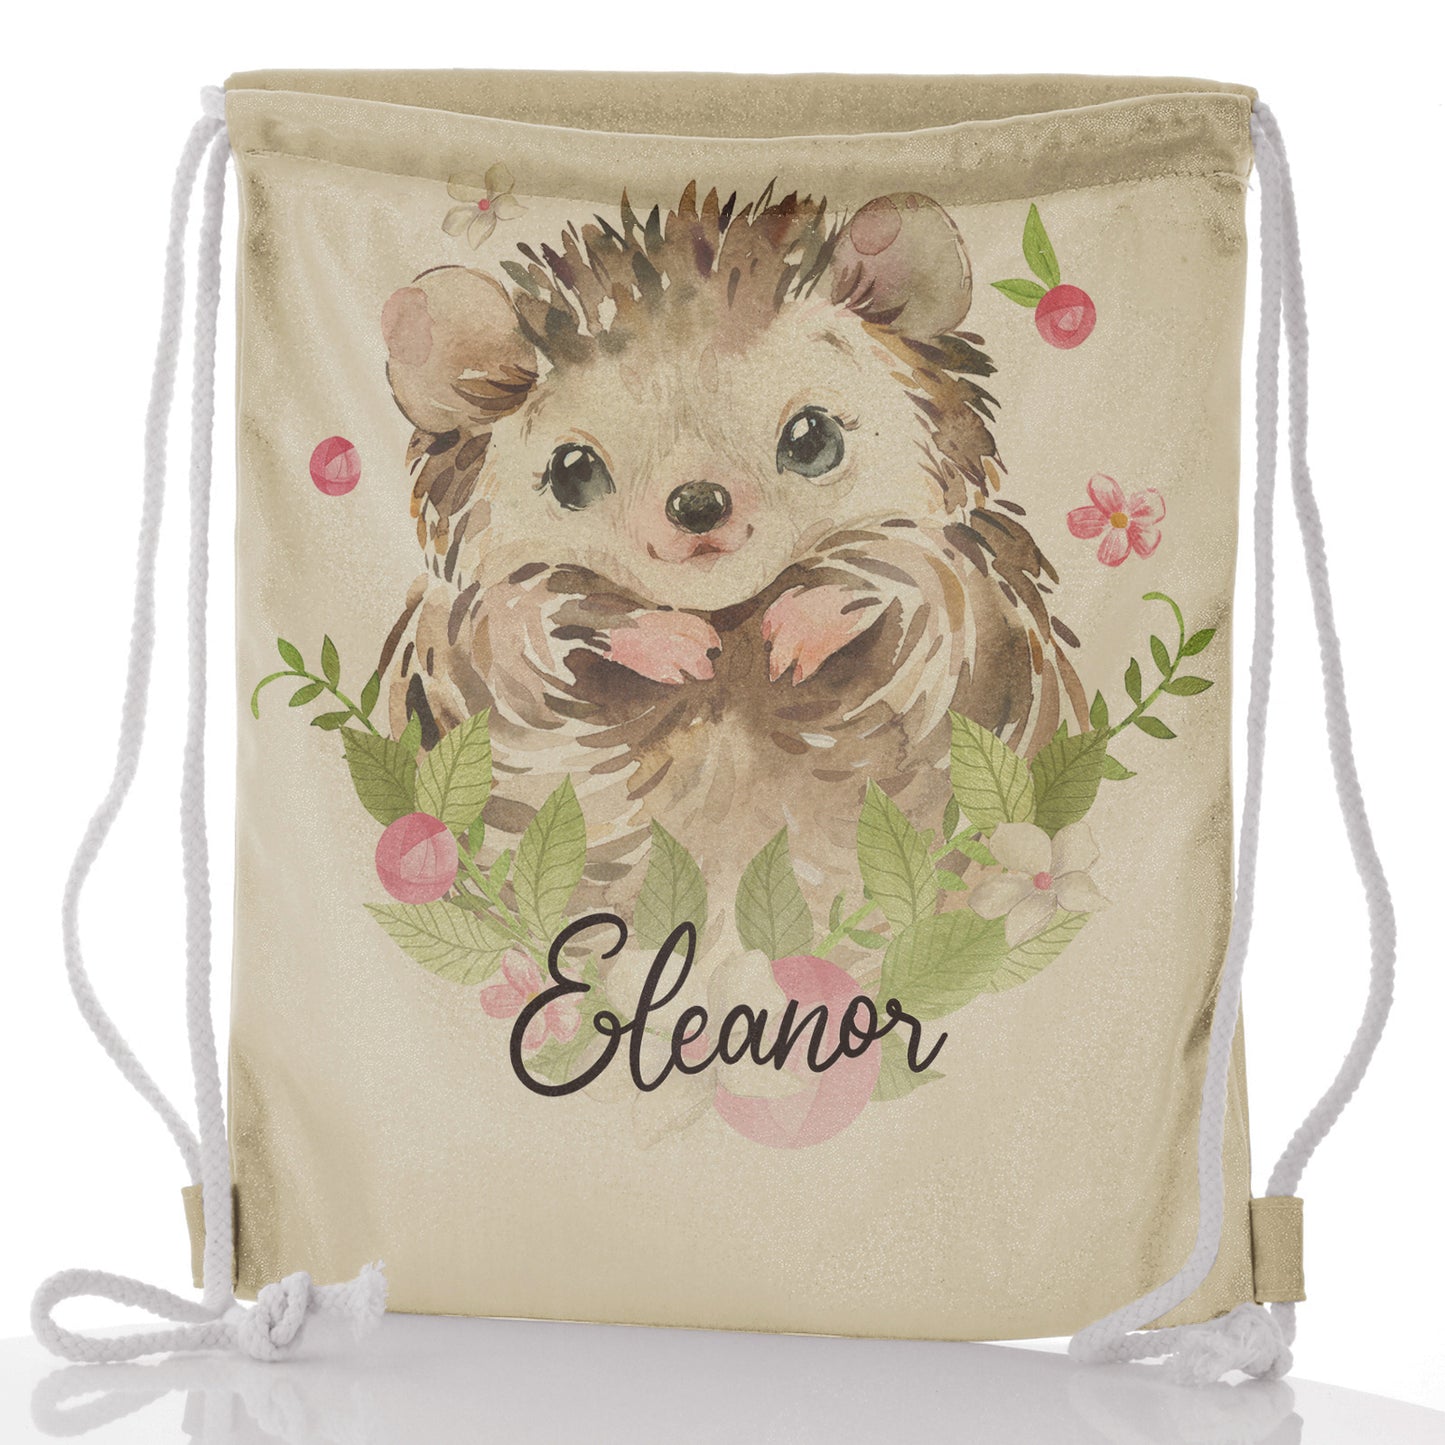 Personalised Glitter Drawstring Backpack with Hedgehog Pink Flowers and Cute Text